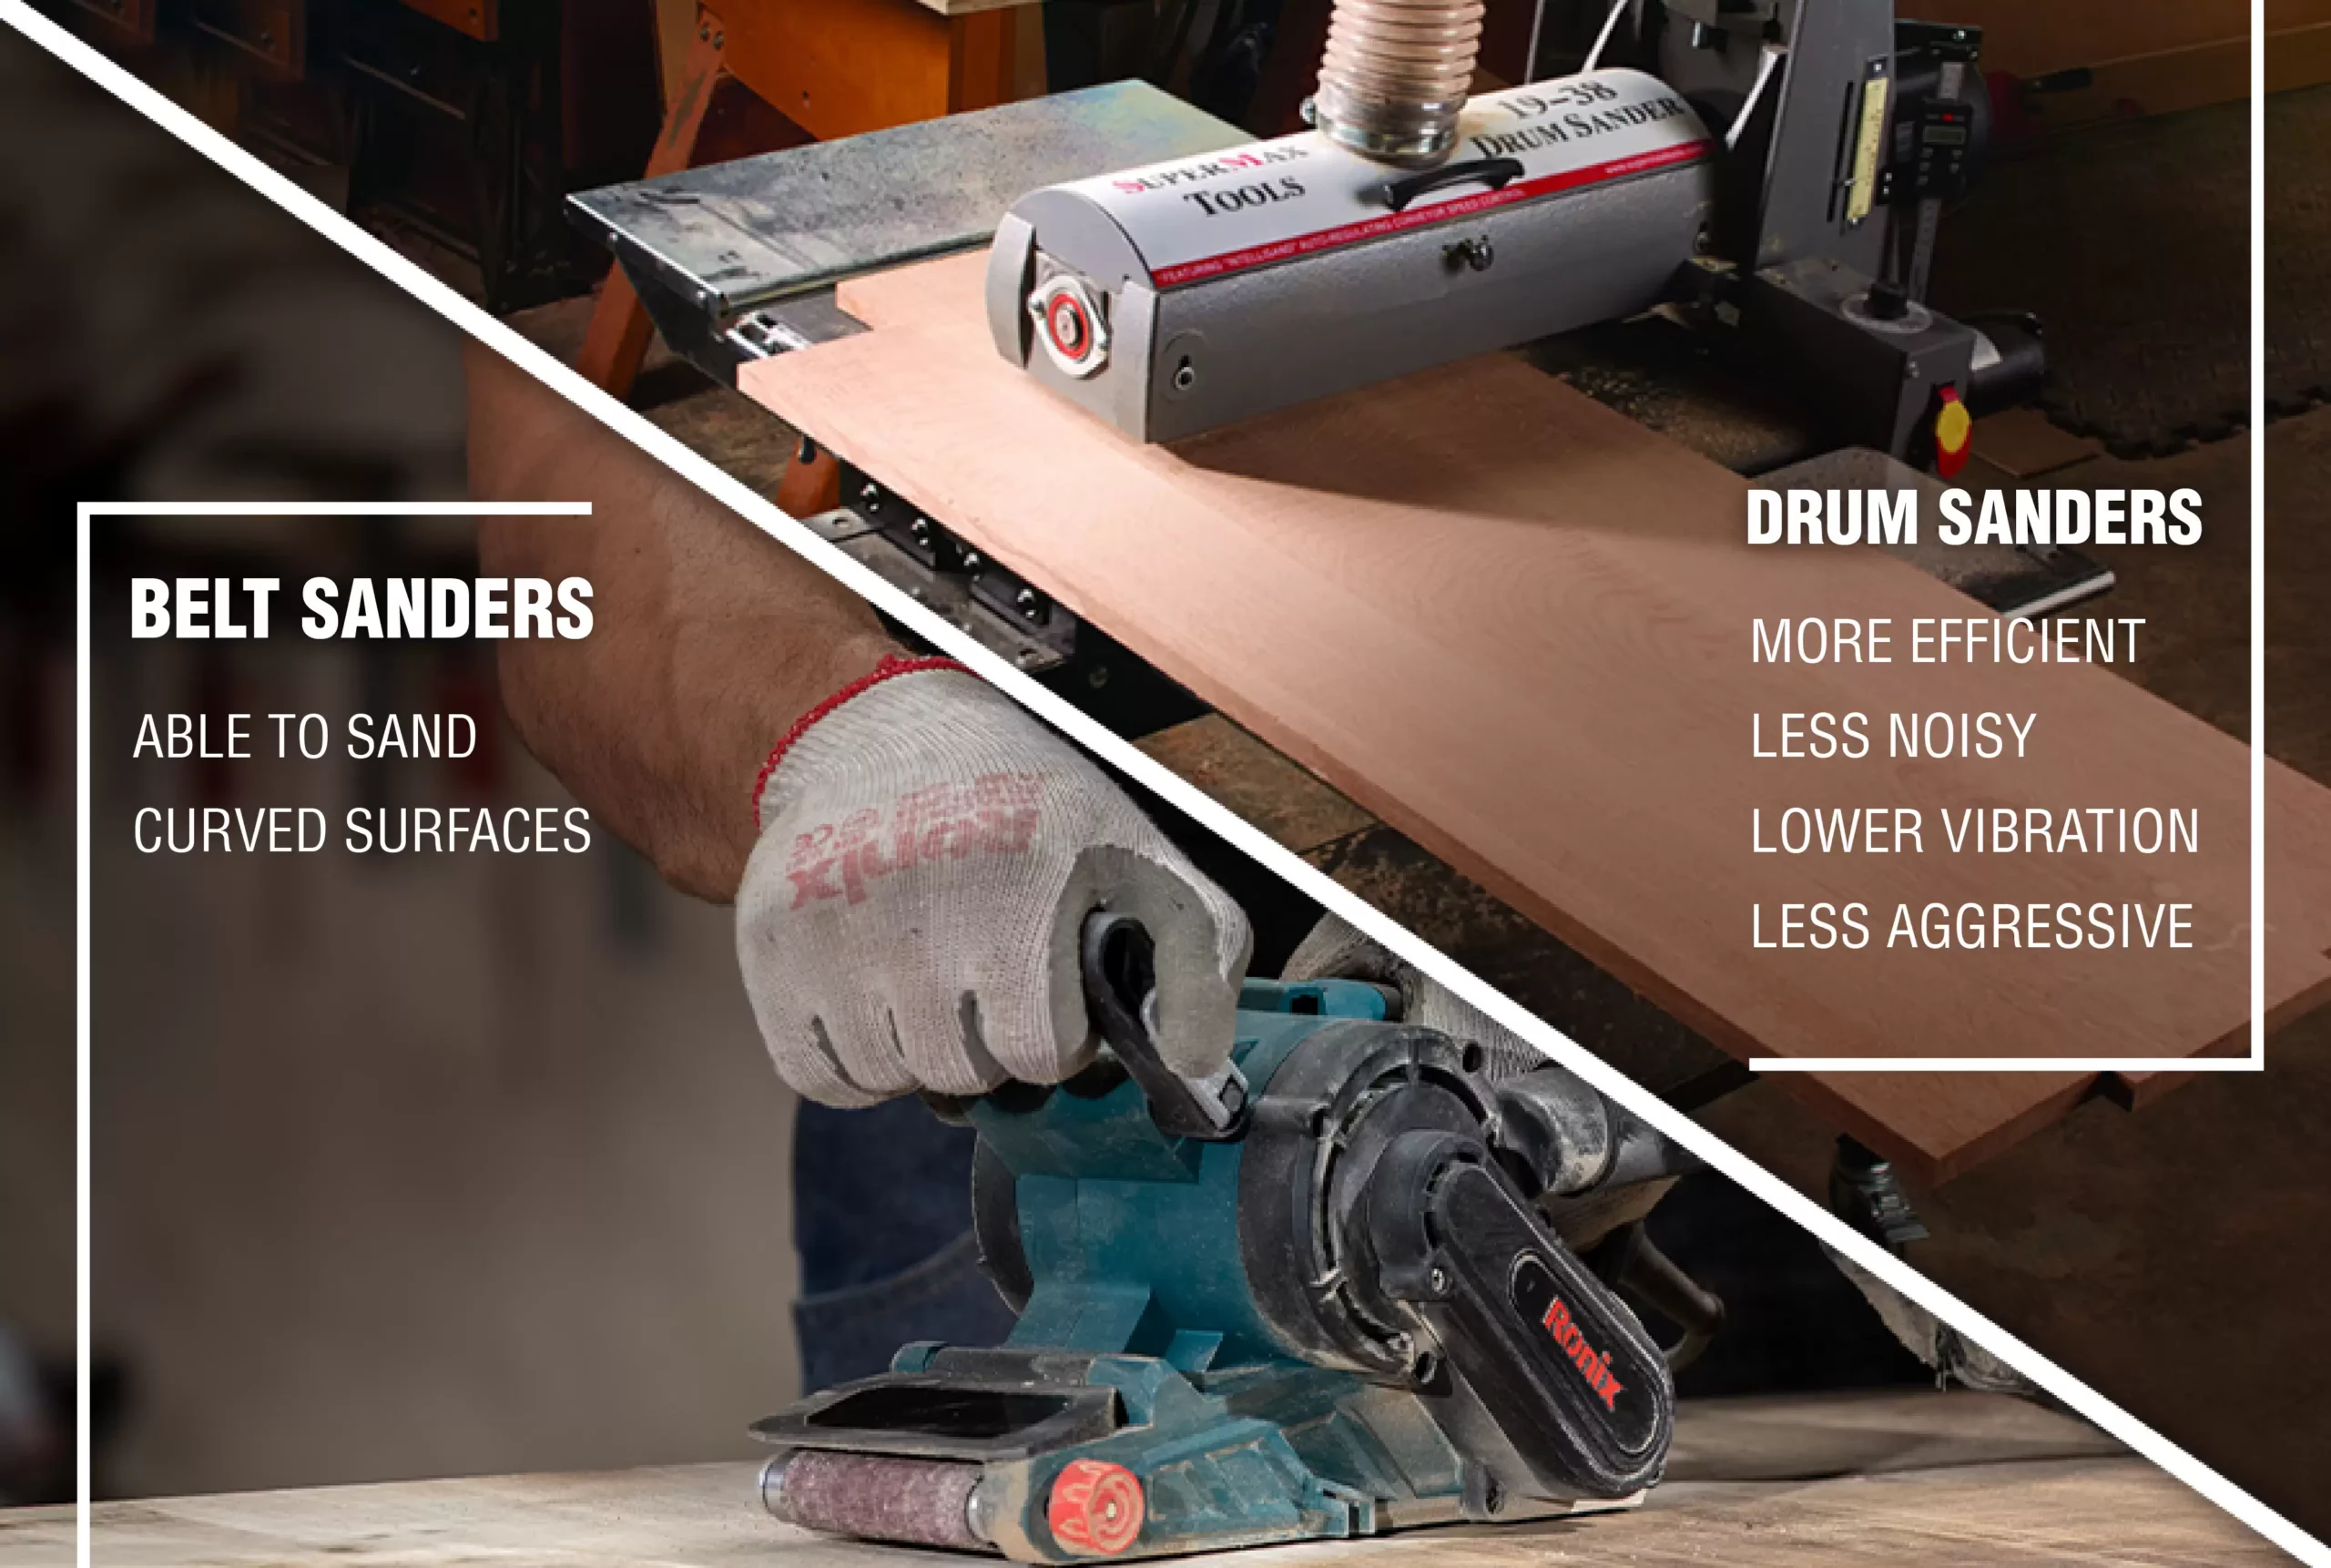 An infographic comparison of belt and drum sanders